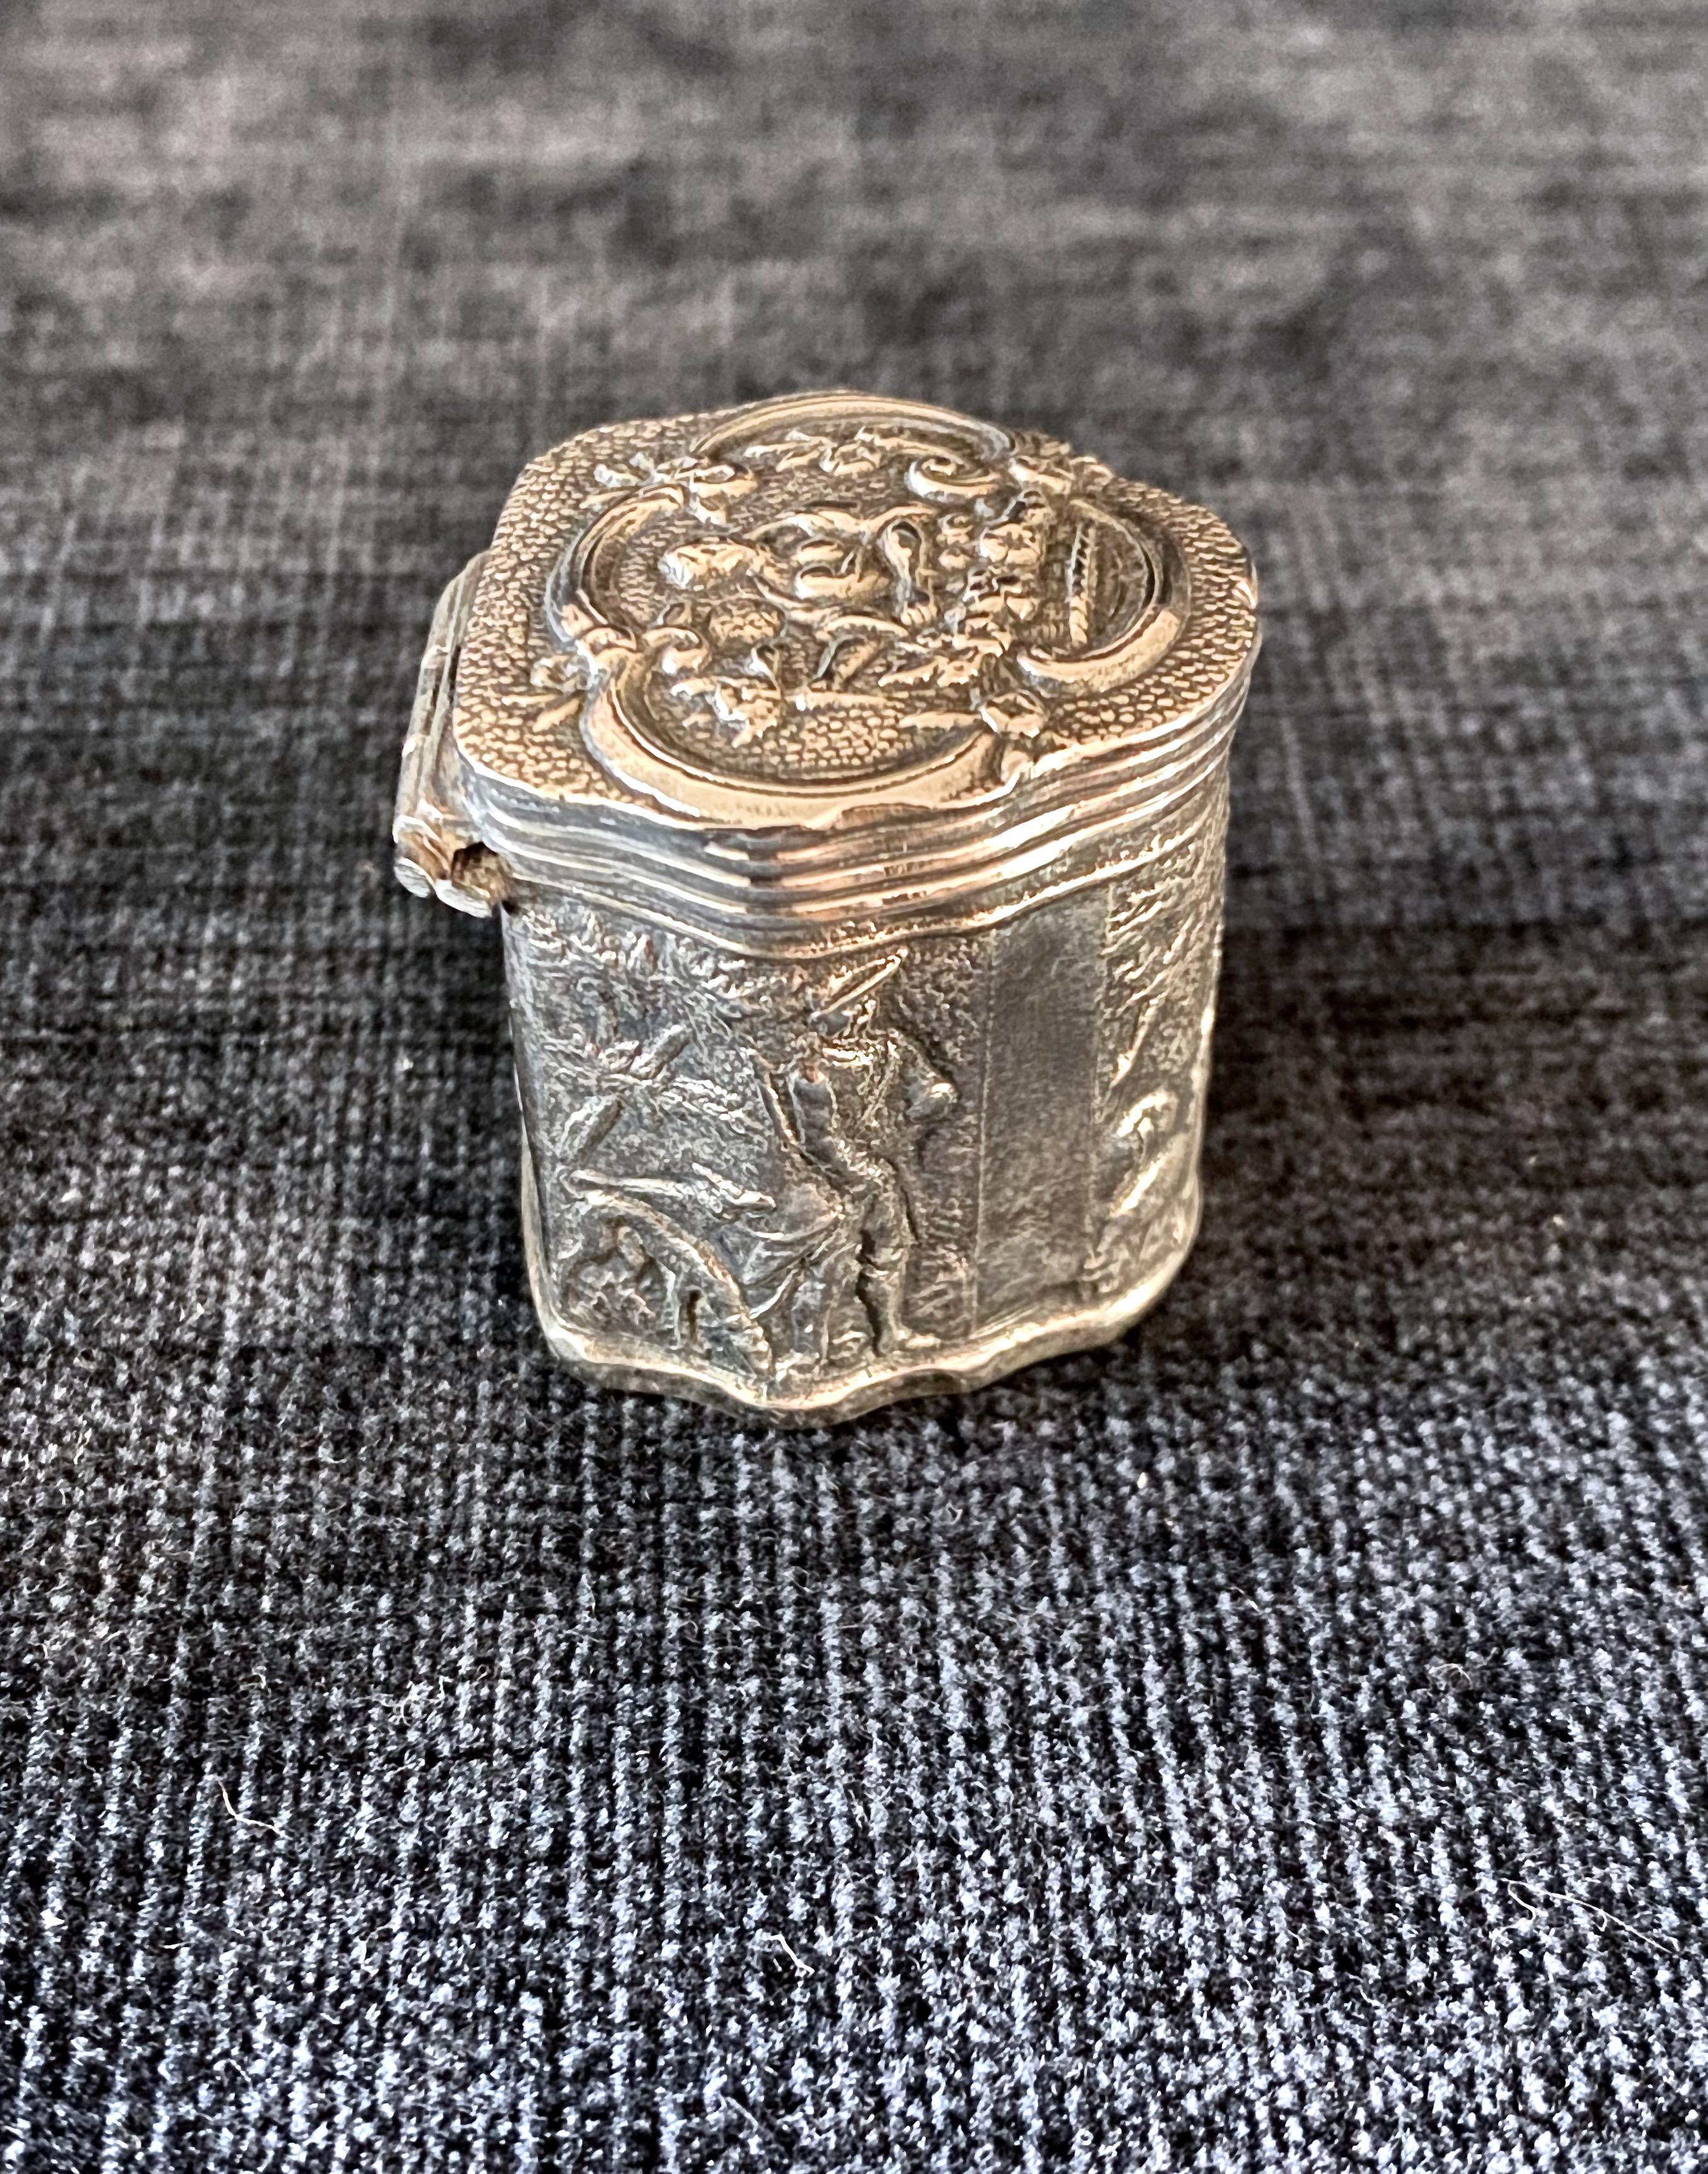 European Sterling Silver Repousse Pill or Snuff Box